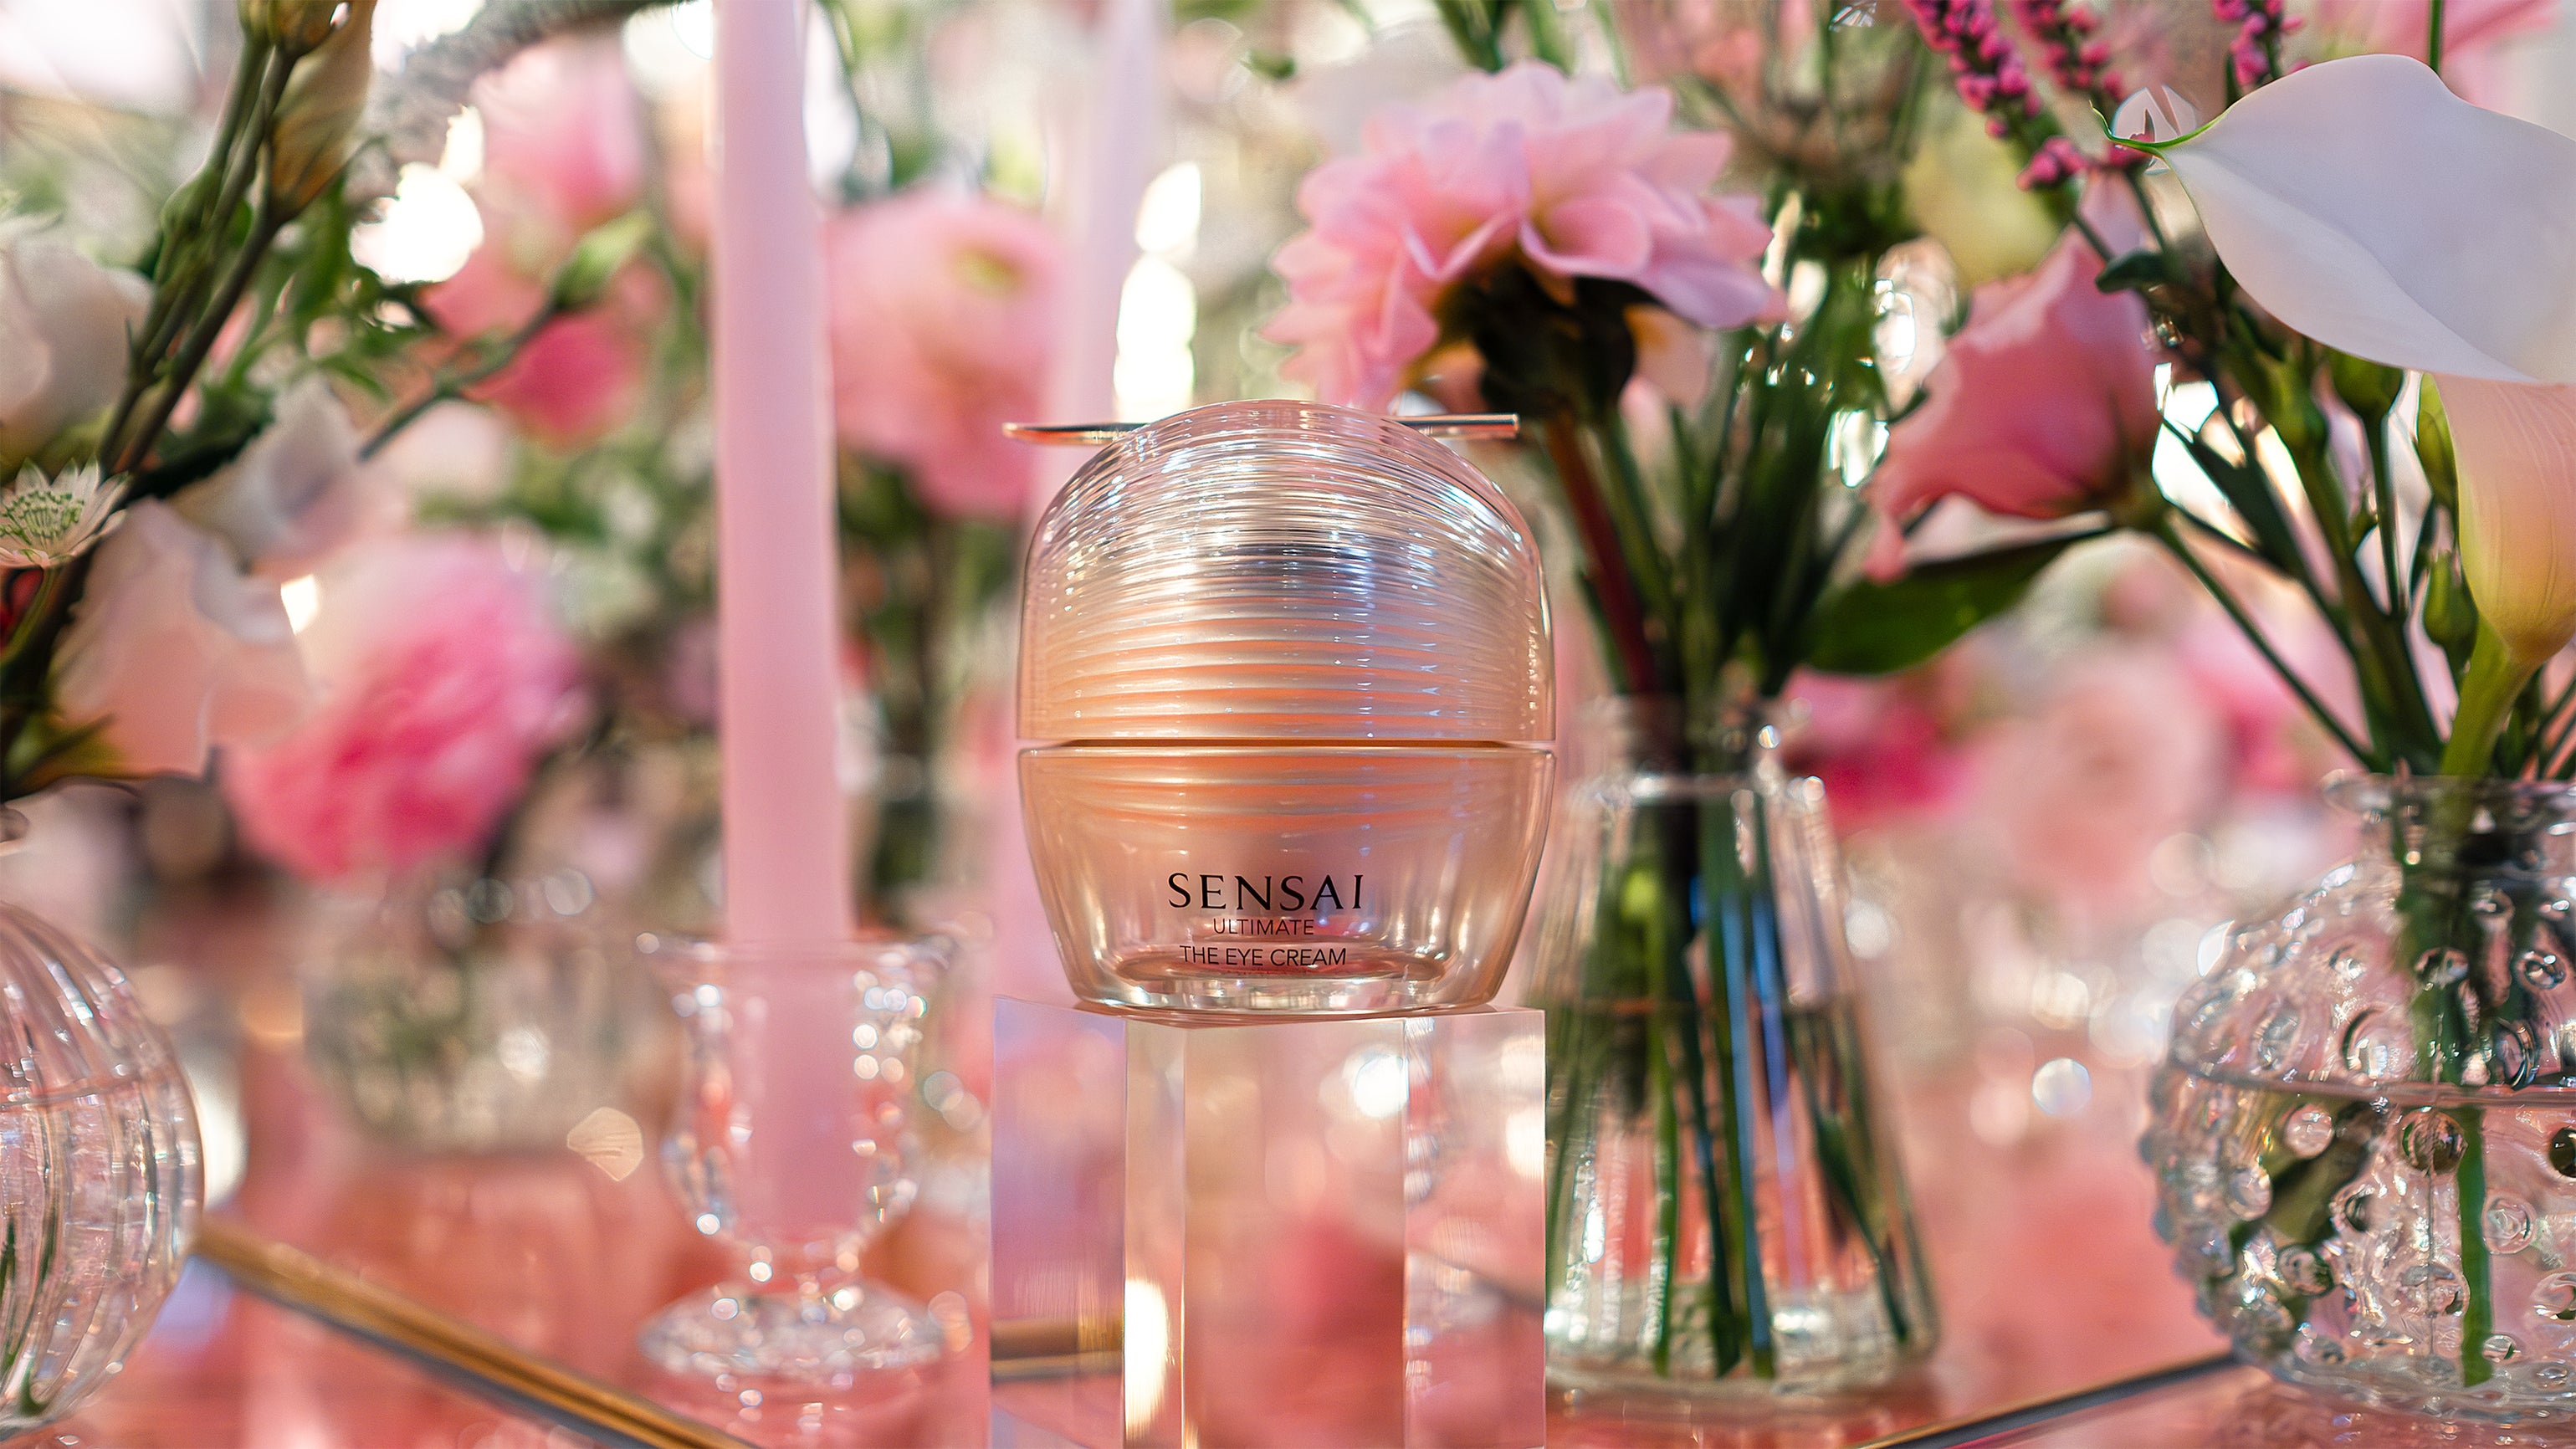 This is a close-up of a pink dahlia amidst a beautiful floral arrangement, designed as part of the decor for The Sensai product launch by Amarante London.